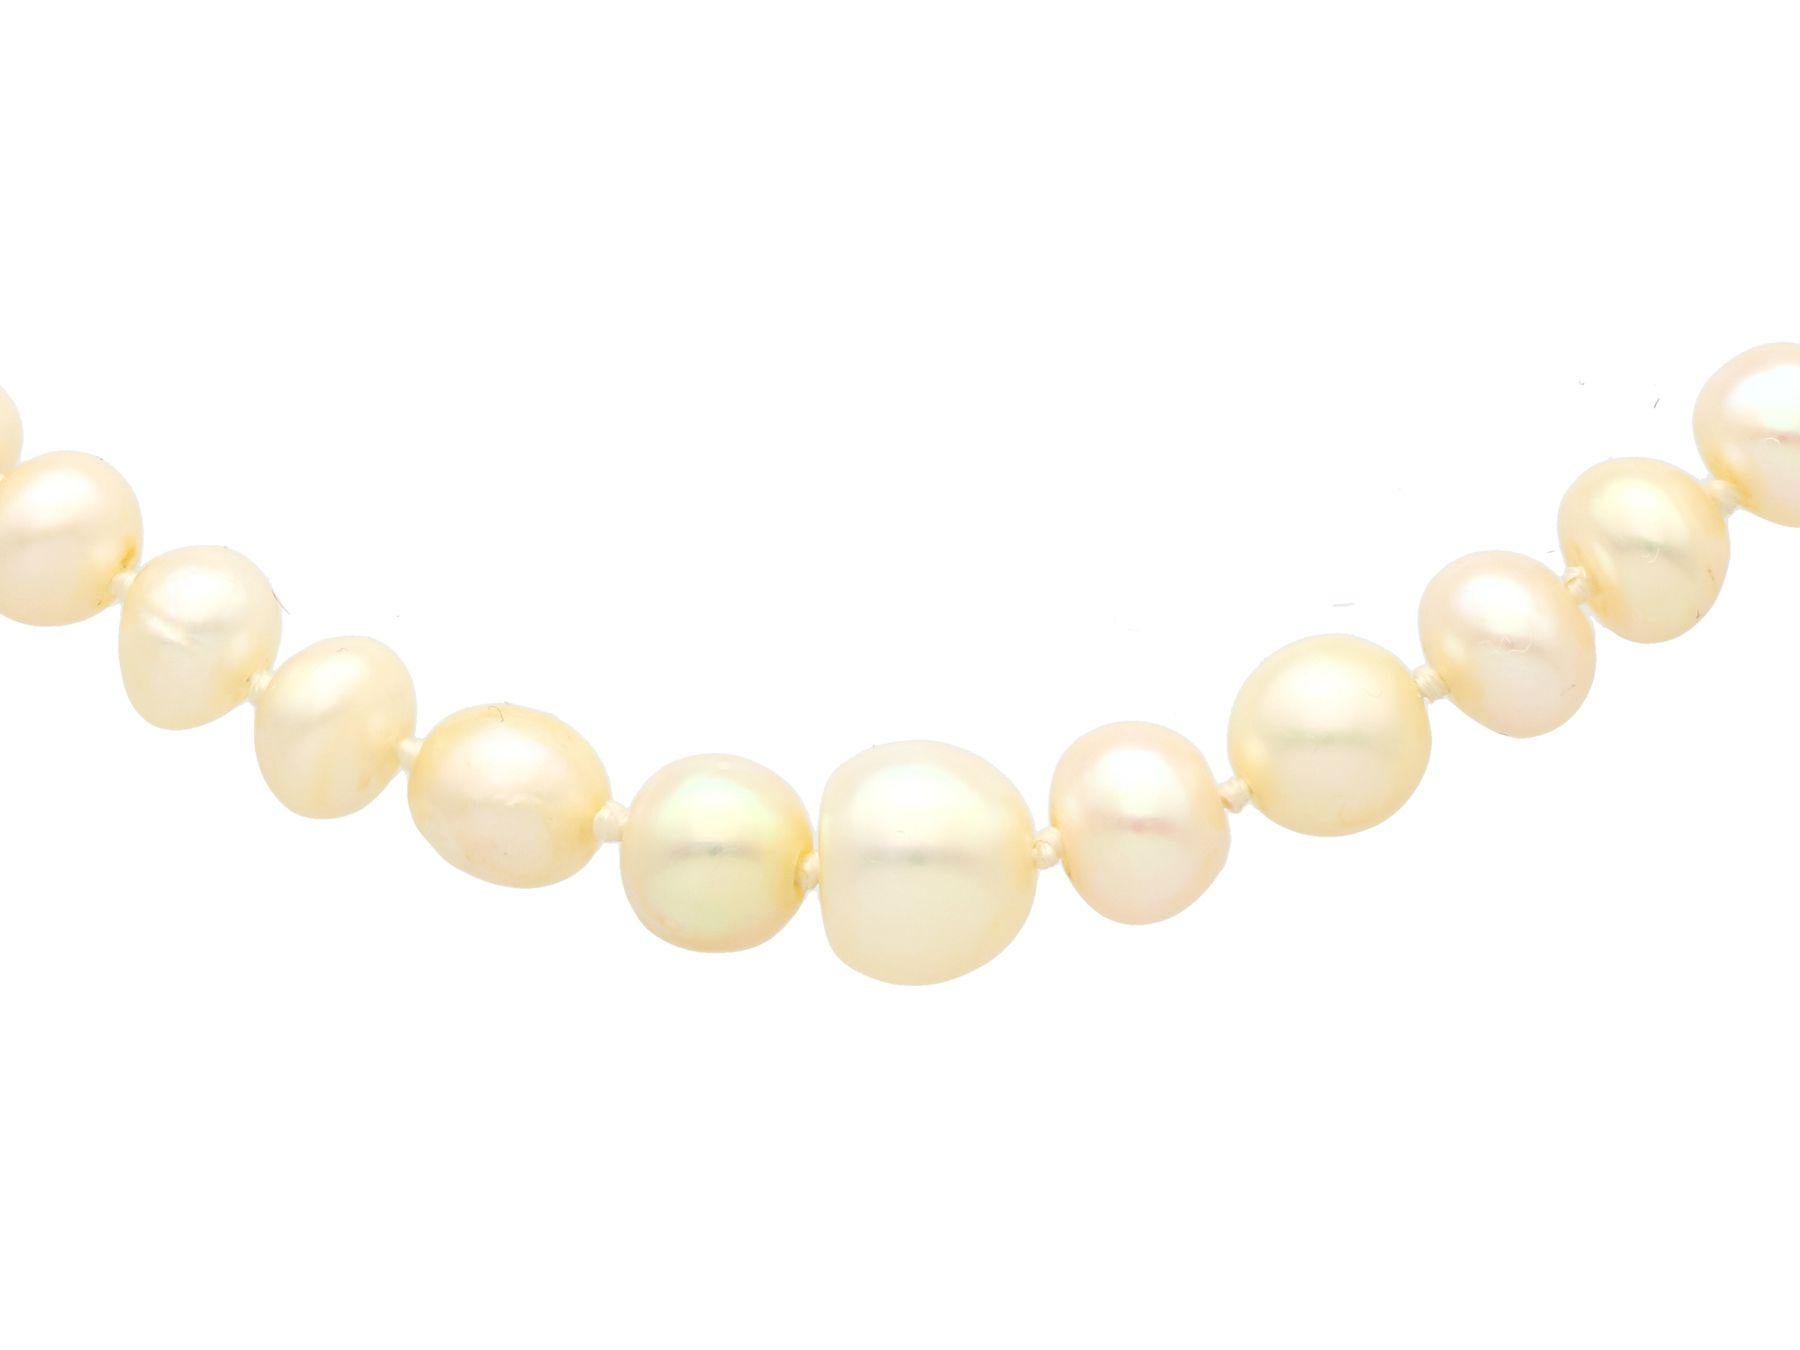 A stunning, fine and impressive single strand natural pearl necklace with a 1.02 carat diamond and silver set clasp; part of our diverse vintage jewellery and estate jewelry collections.

This stunning, fine and impressive antique pearl necklace has